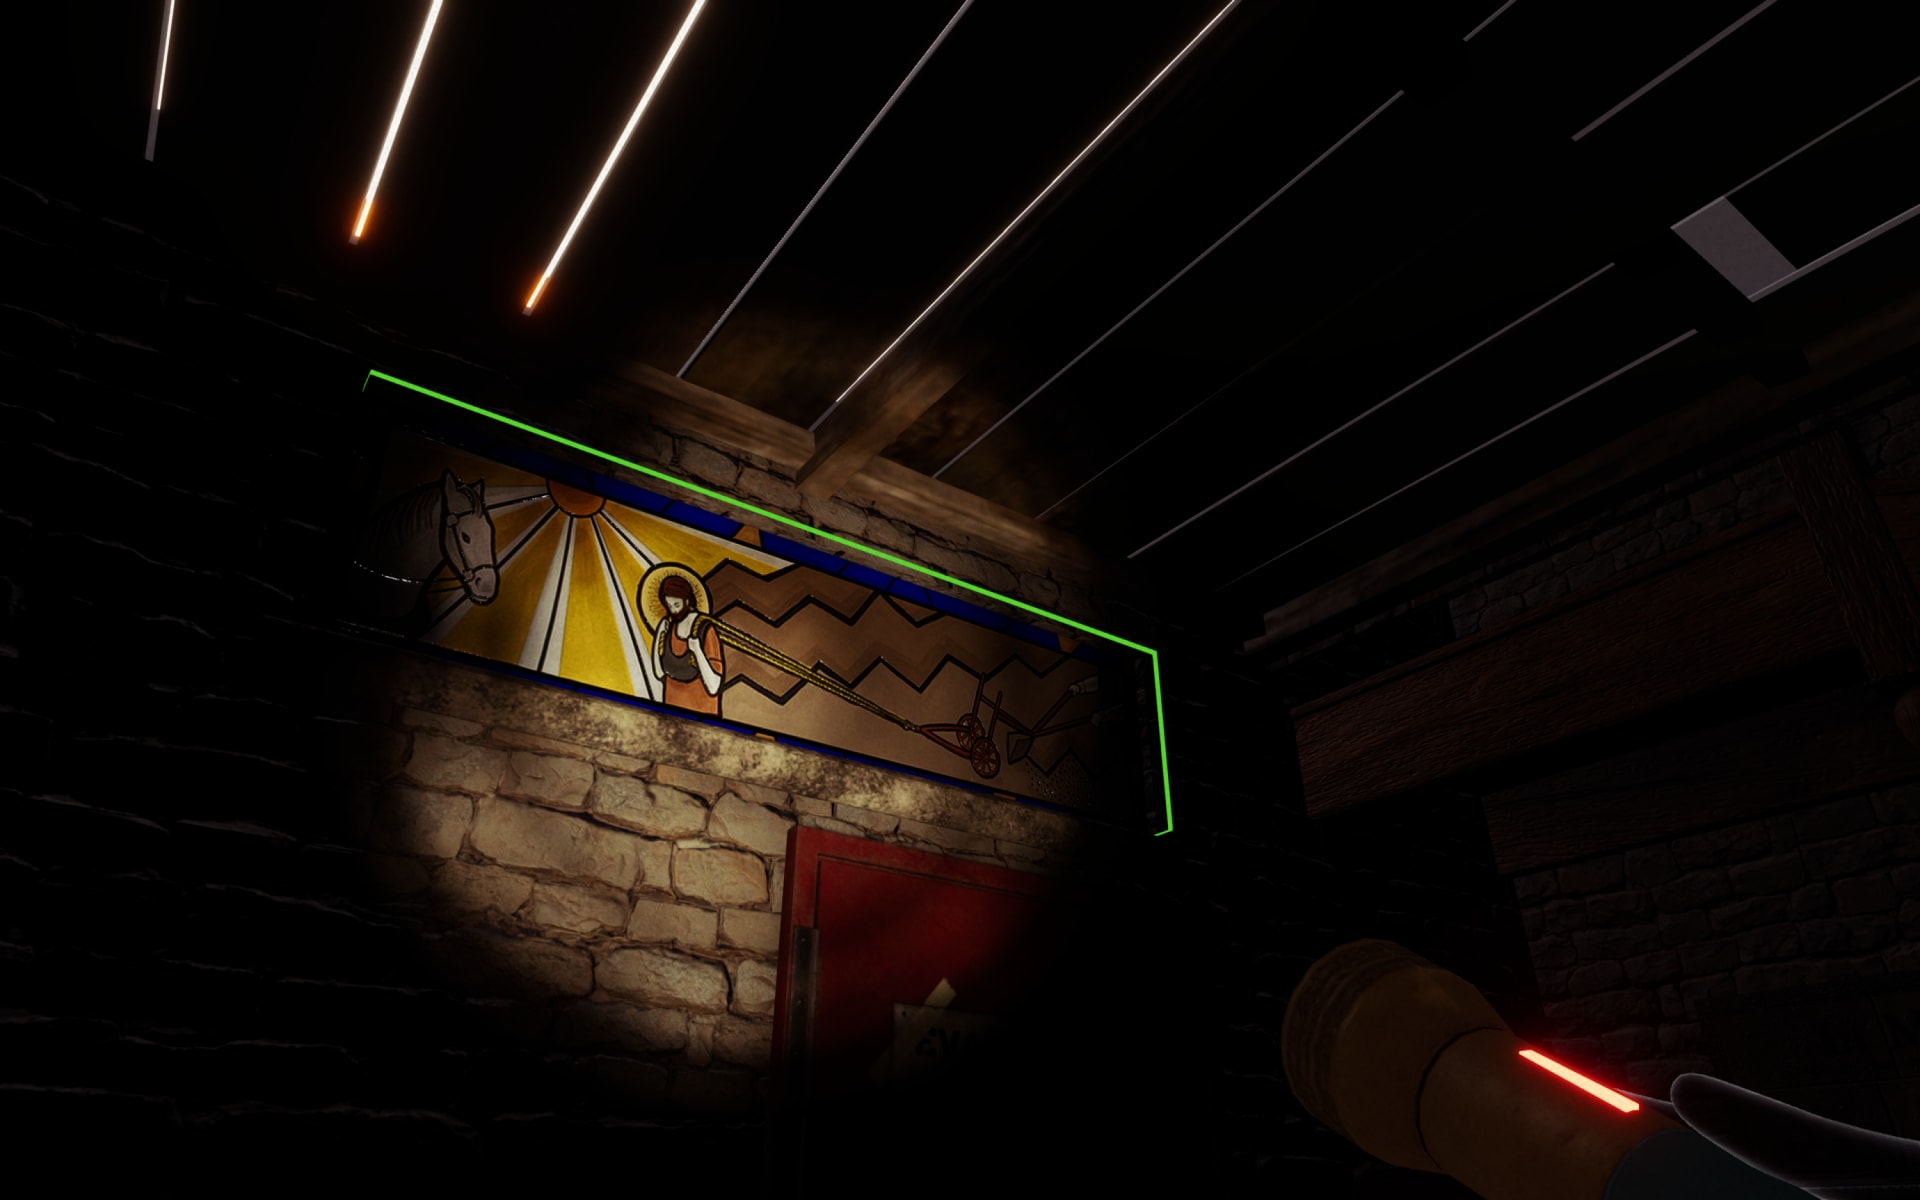 In-game screenshot focusing on a stained glass window. Perspective is limited by the reach of the torchlight, so little beyond the window, the crumbling brick wall it is embedded in, and the wooden floorboards overhead is discernible. The window depicts, in landscape format and bright colours, a scene in which a male figure, head surrounded by golden halo, is pulling an old fashion plough through dark brown fields. On his left stands a horse, the pair separated by a large sun with emerging beams.